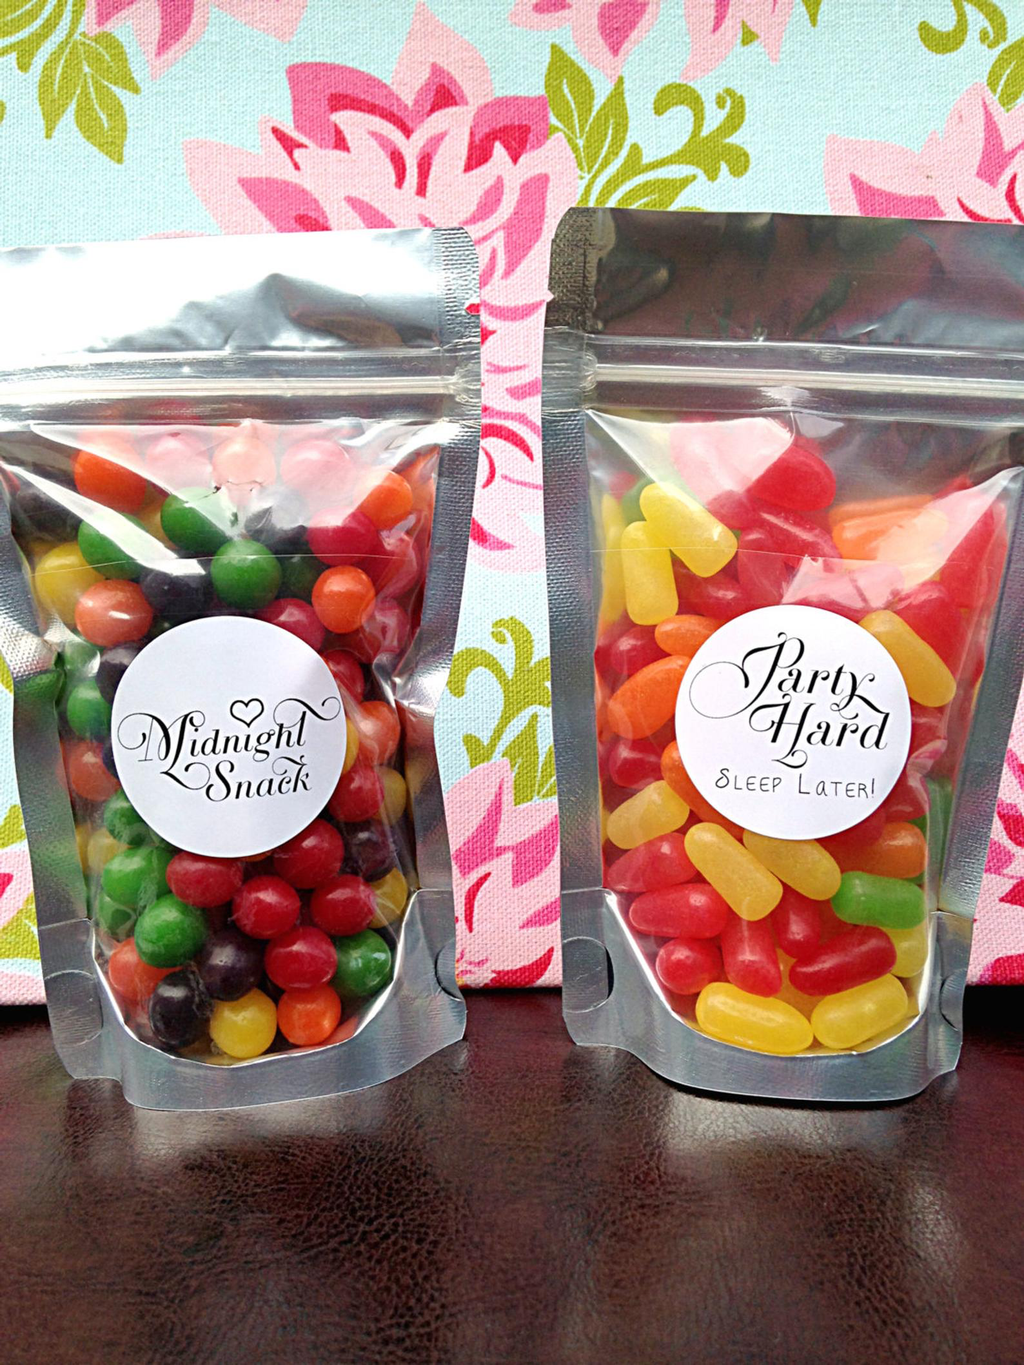 Party Favor Snack Bags - Welcome Bag Fillers - Dessert Table